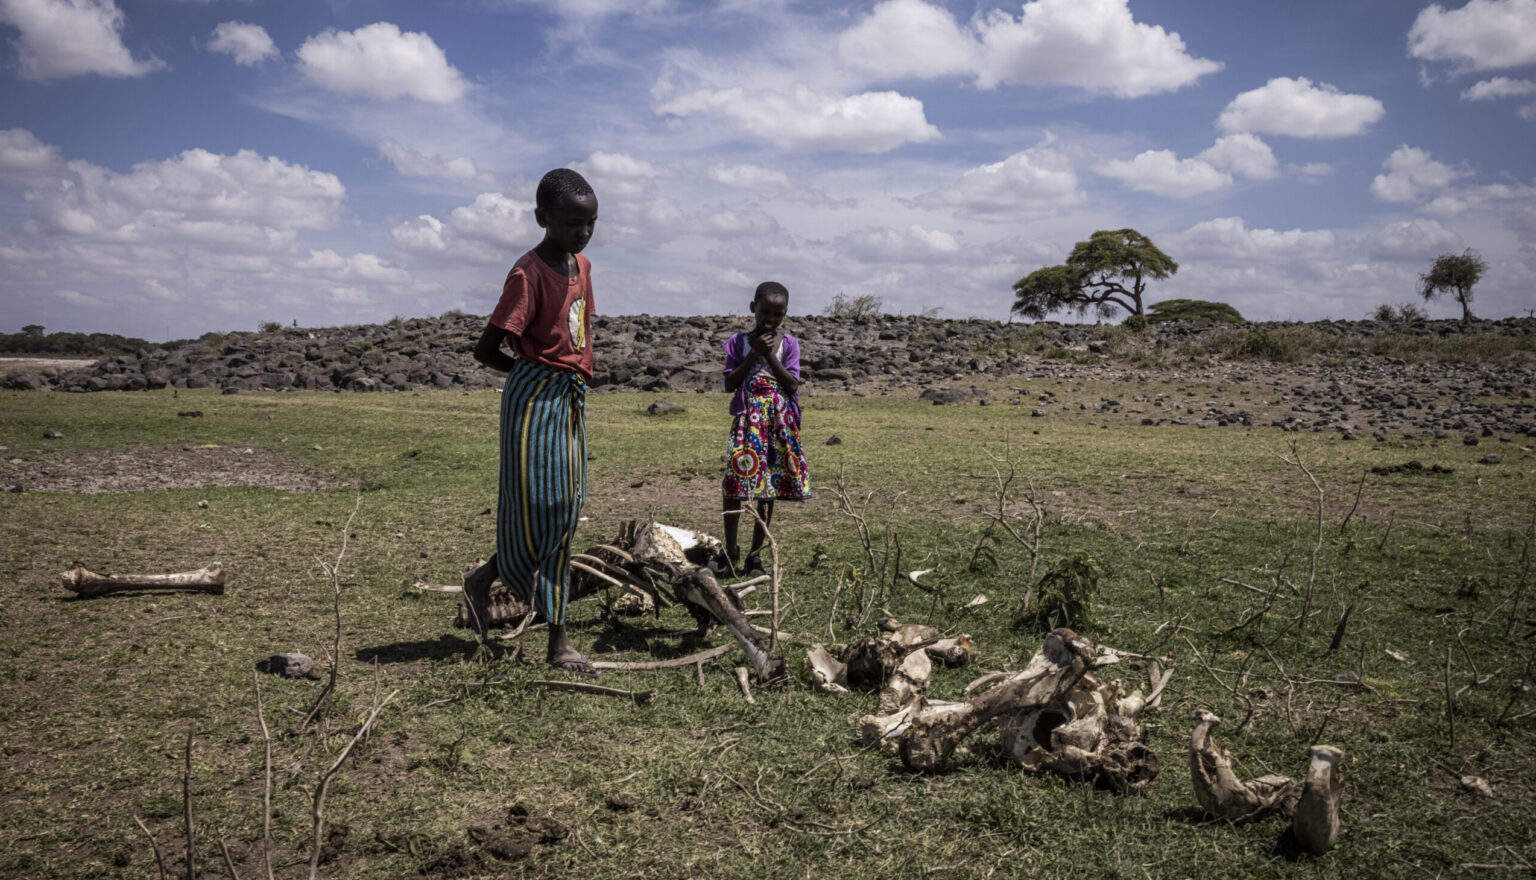 Children from a Maasai community look at the remains of an elephant that died in the drought on community land near the outskirts of Amboseli National Park on 18 December 2022 in Amboseli, Kenya. Photo: Ed Ram / Getty Images Europe / AFP